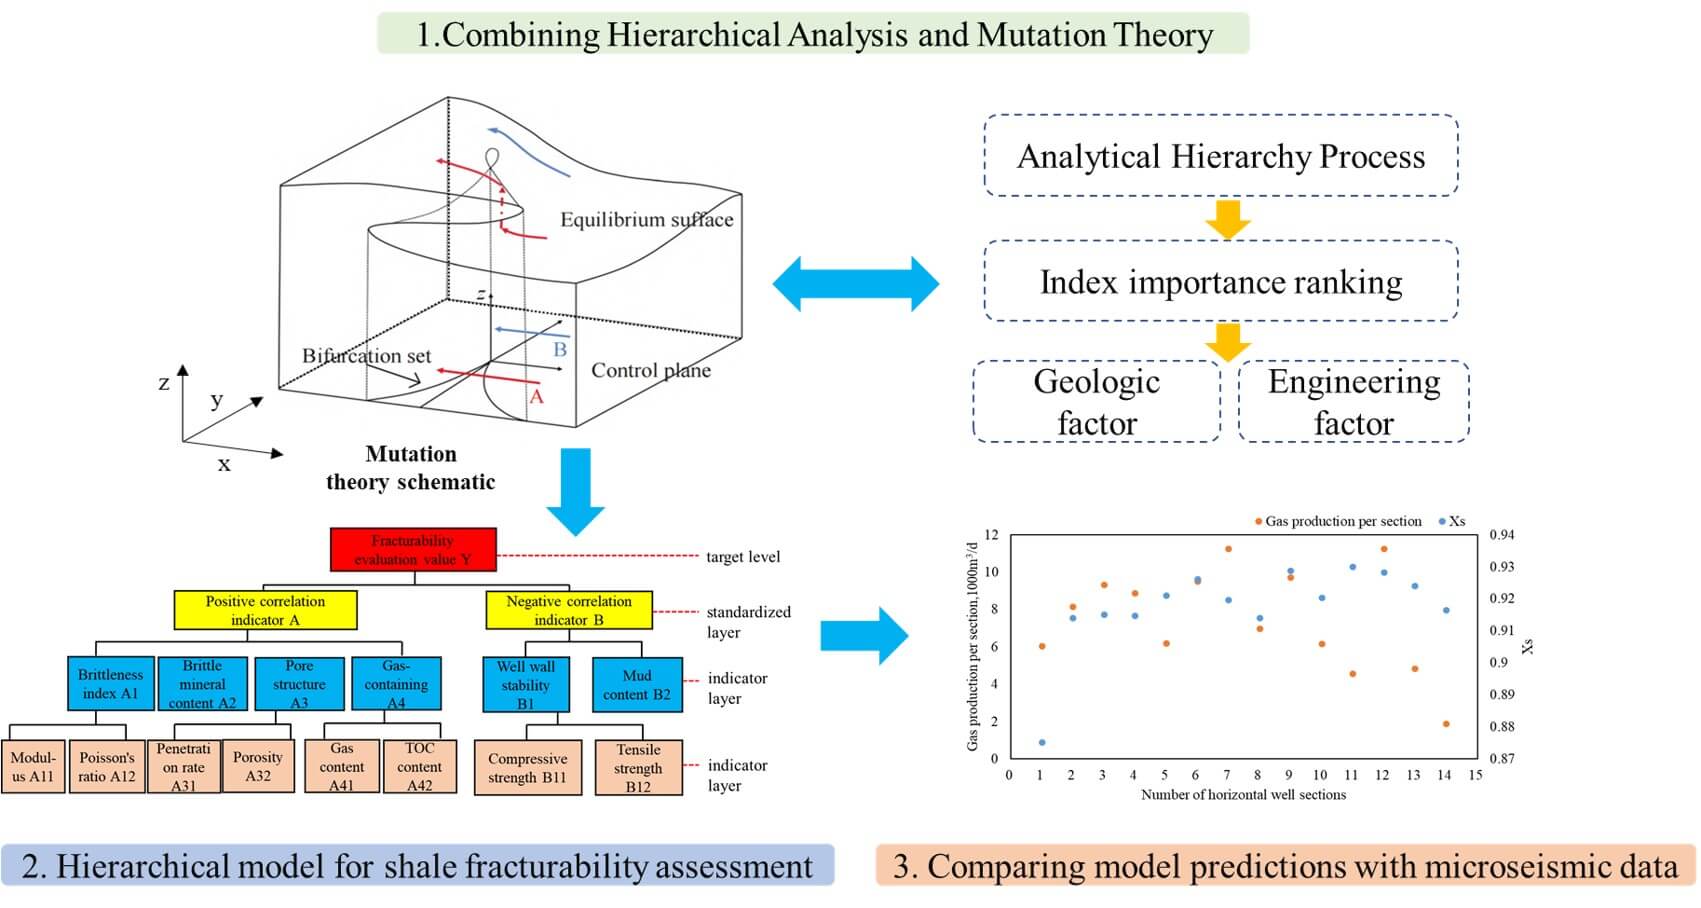 Shale Fracturability Graphic Template Based on Mixed Analytic Hierar-chy Process and Mutation Theory